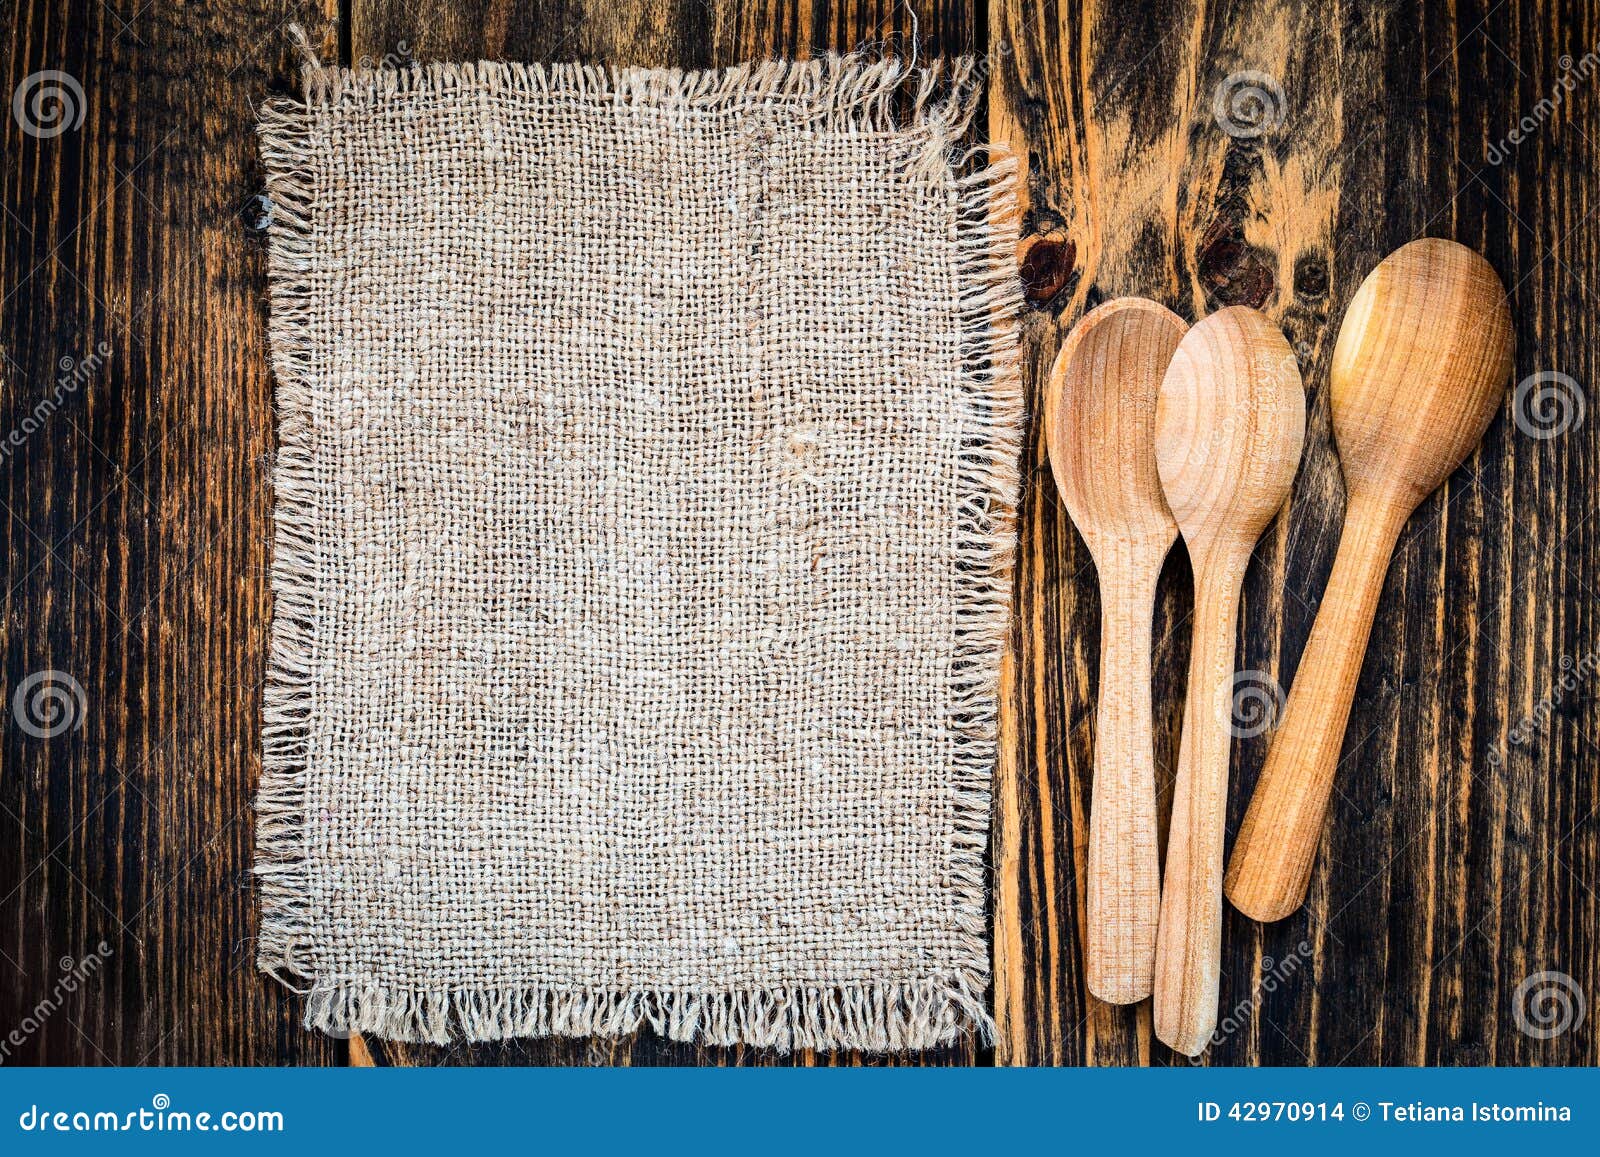 burlap and rural kitchen utensils on wooden table view